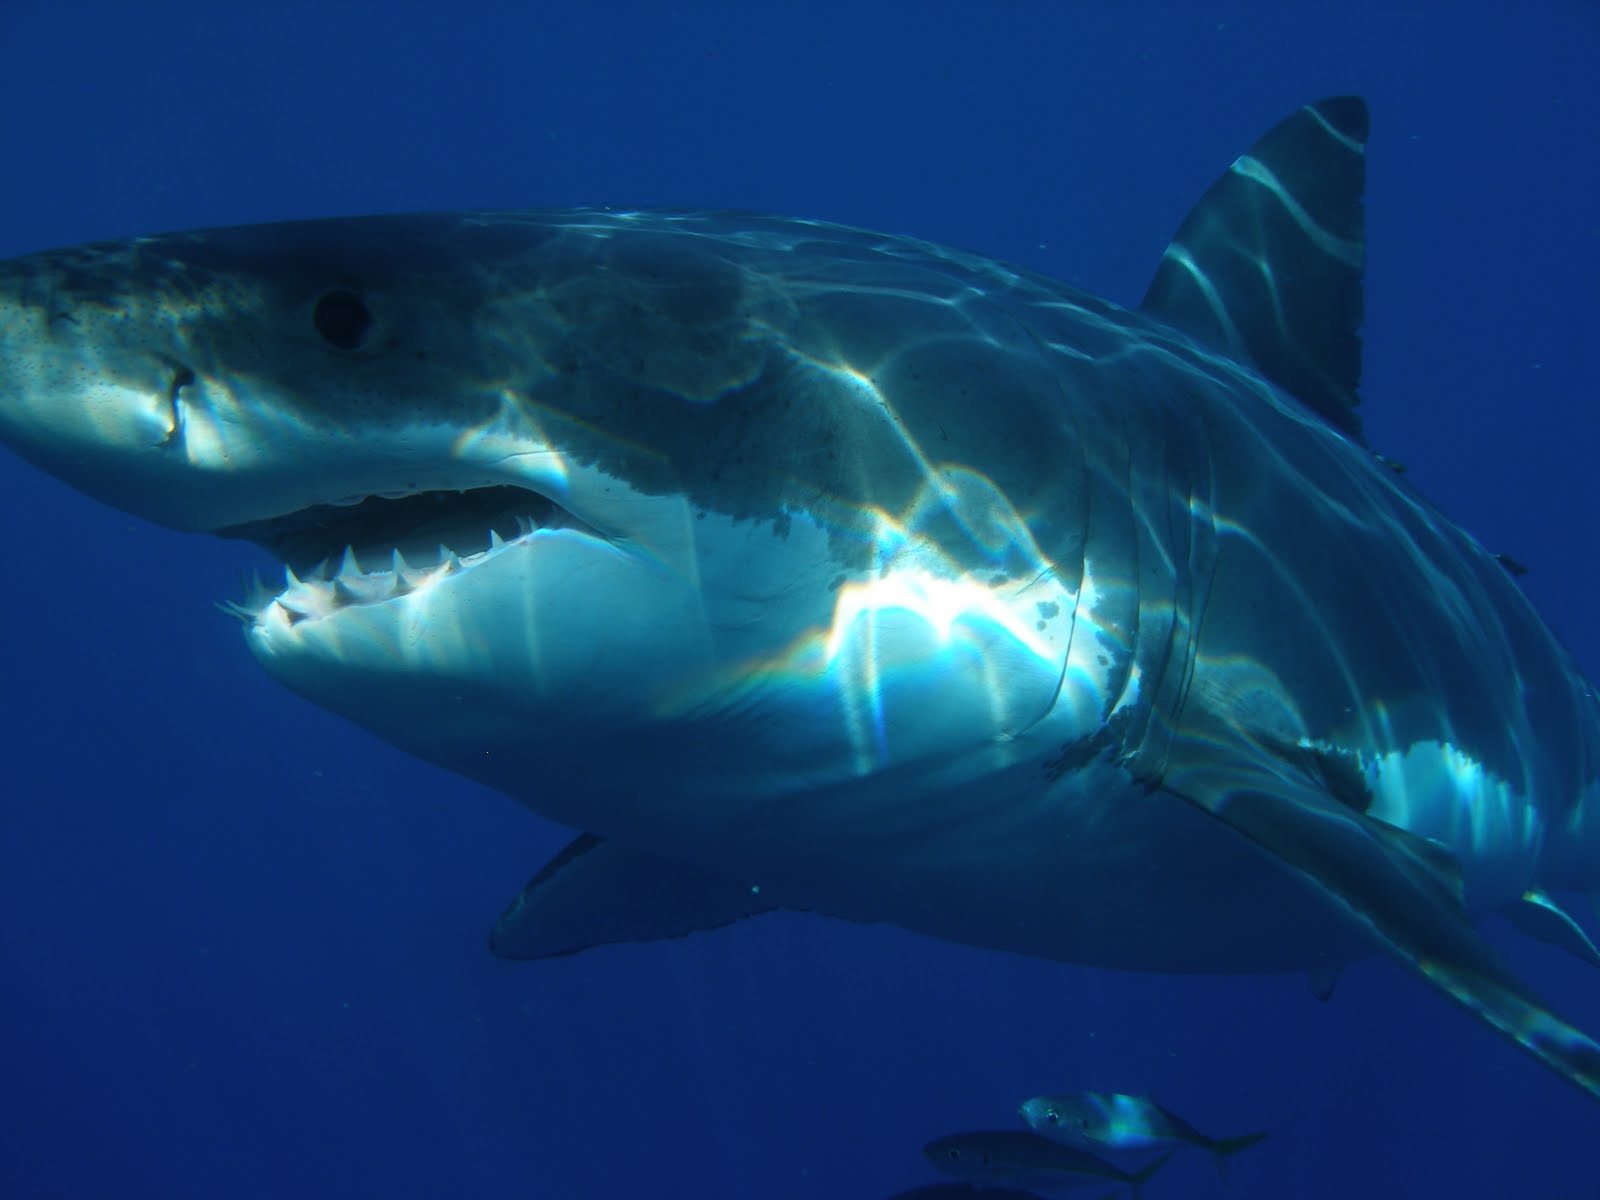 Great White Shark Images 27143 Hd Wallpapers in Animals   Imagescicom